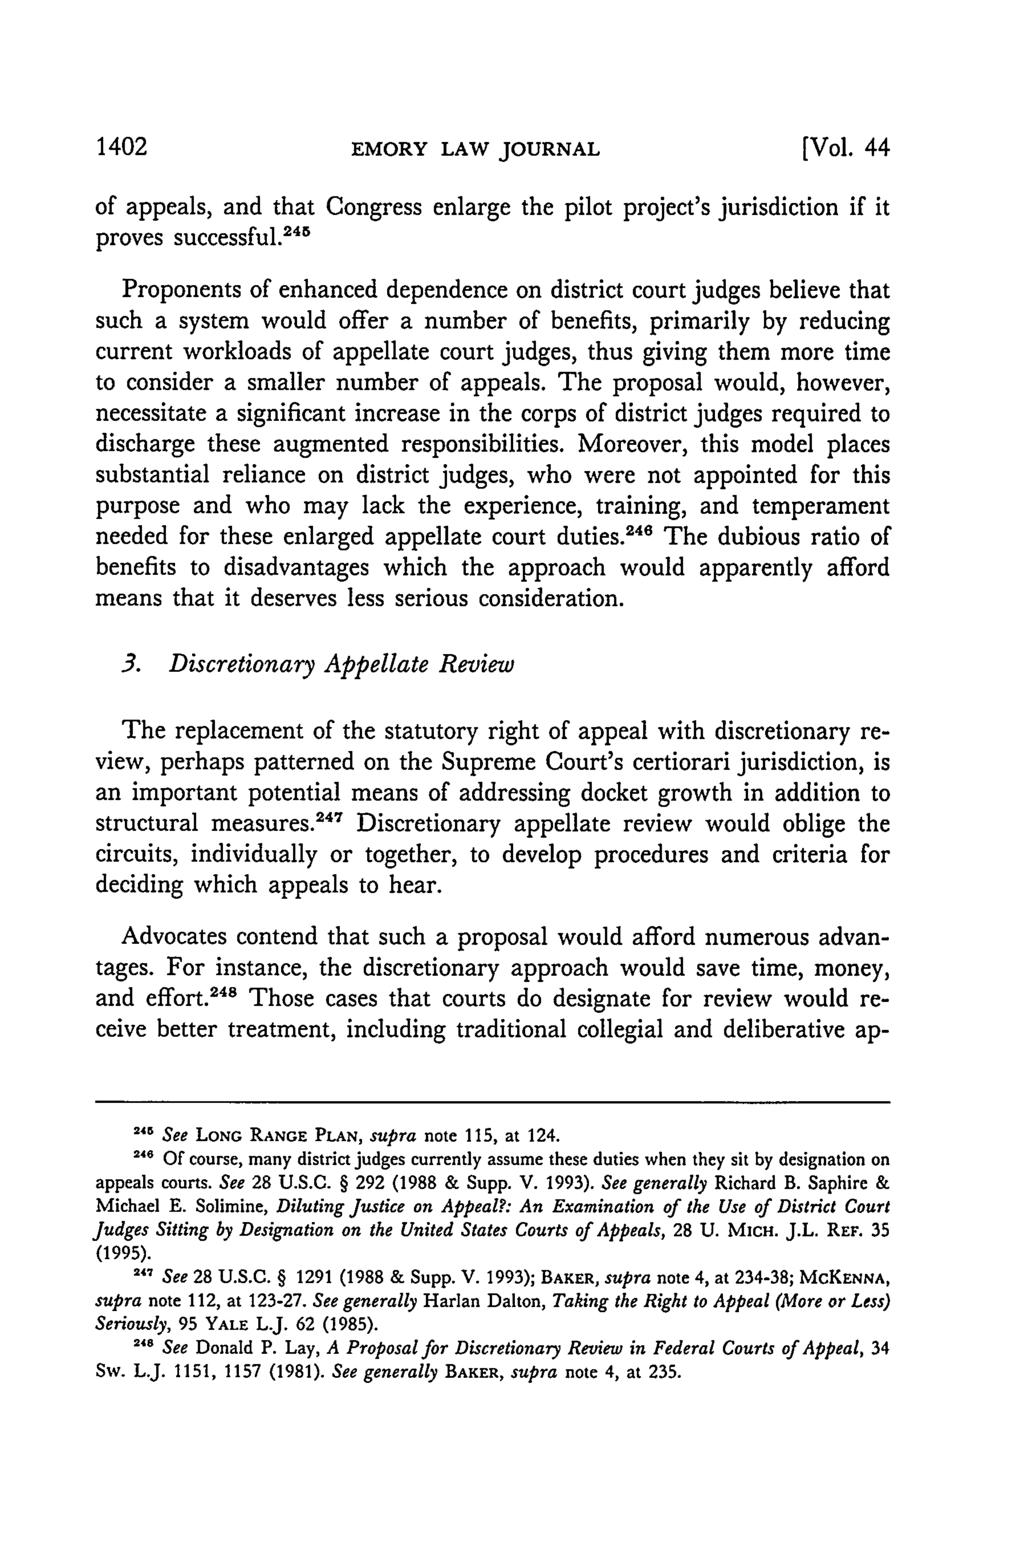 1402 EMORY LAW JOURNAL [Vol. 44 of appeals, and that Congress enlarge the pilot project's jurisdiction if it proves successful.